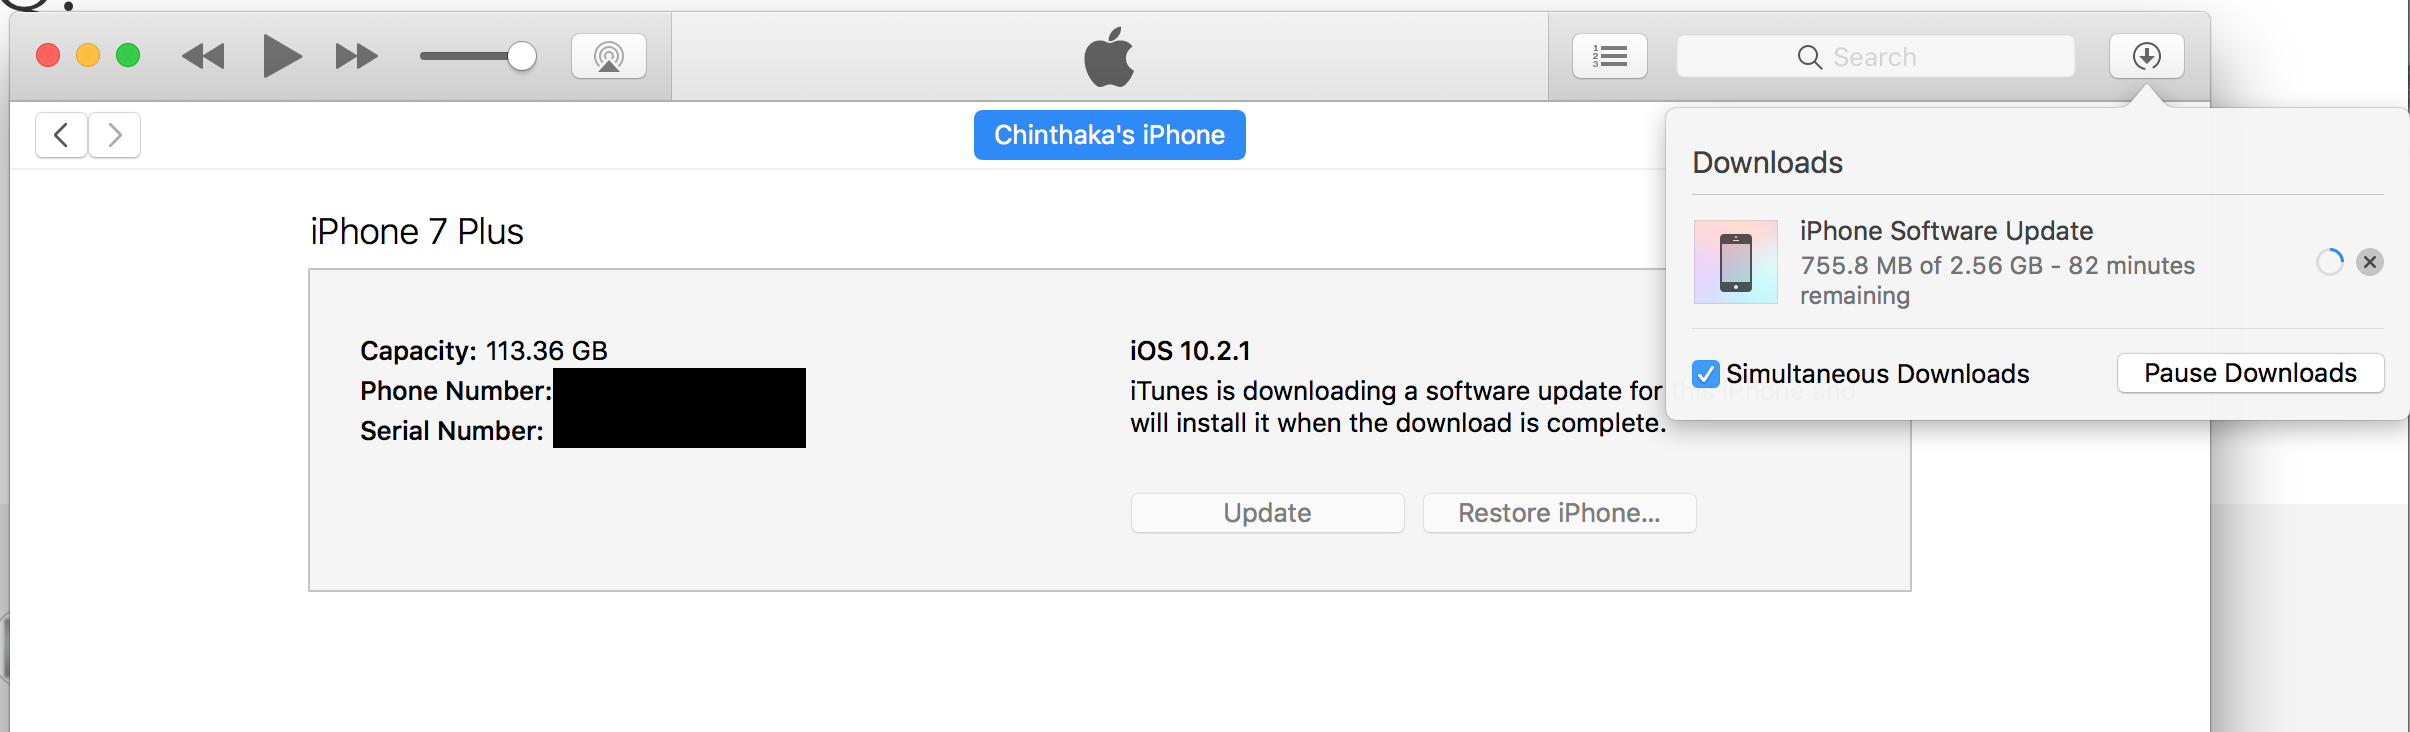 how long for itunes to download software for iphone